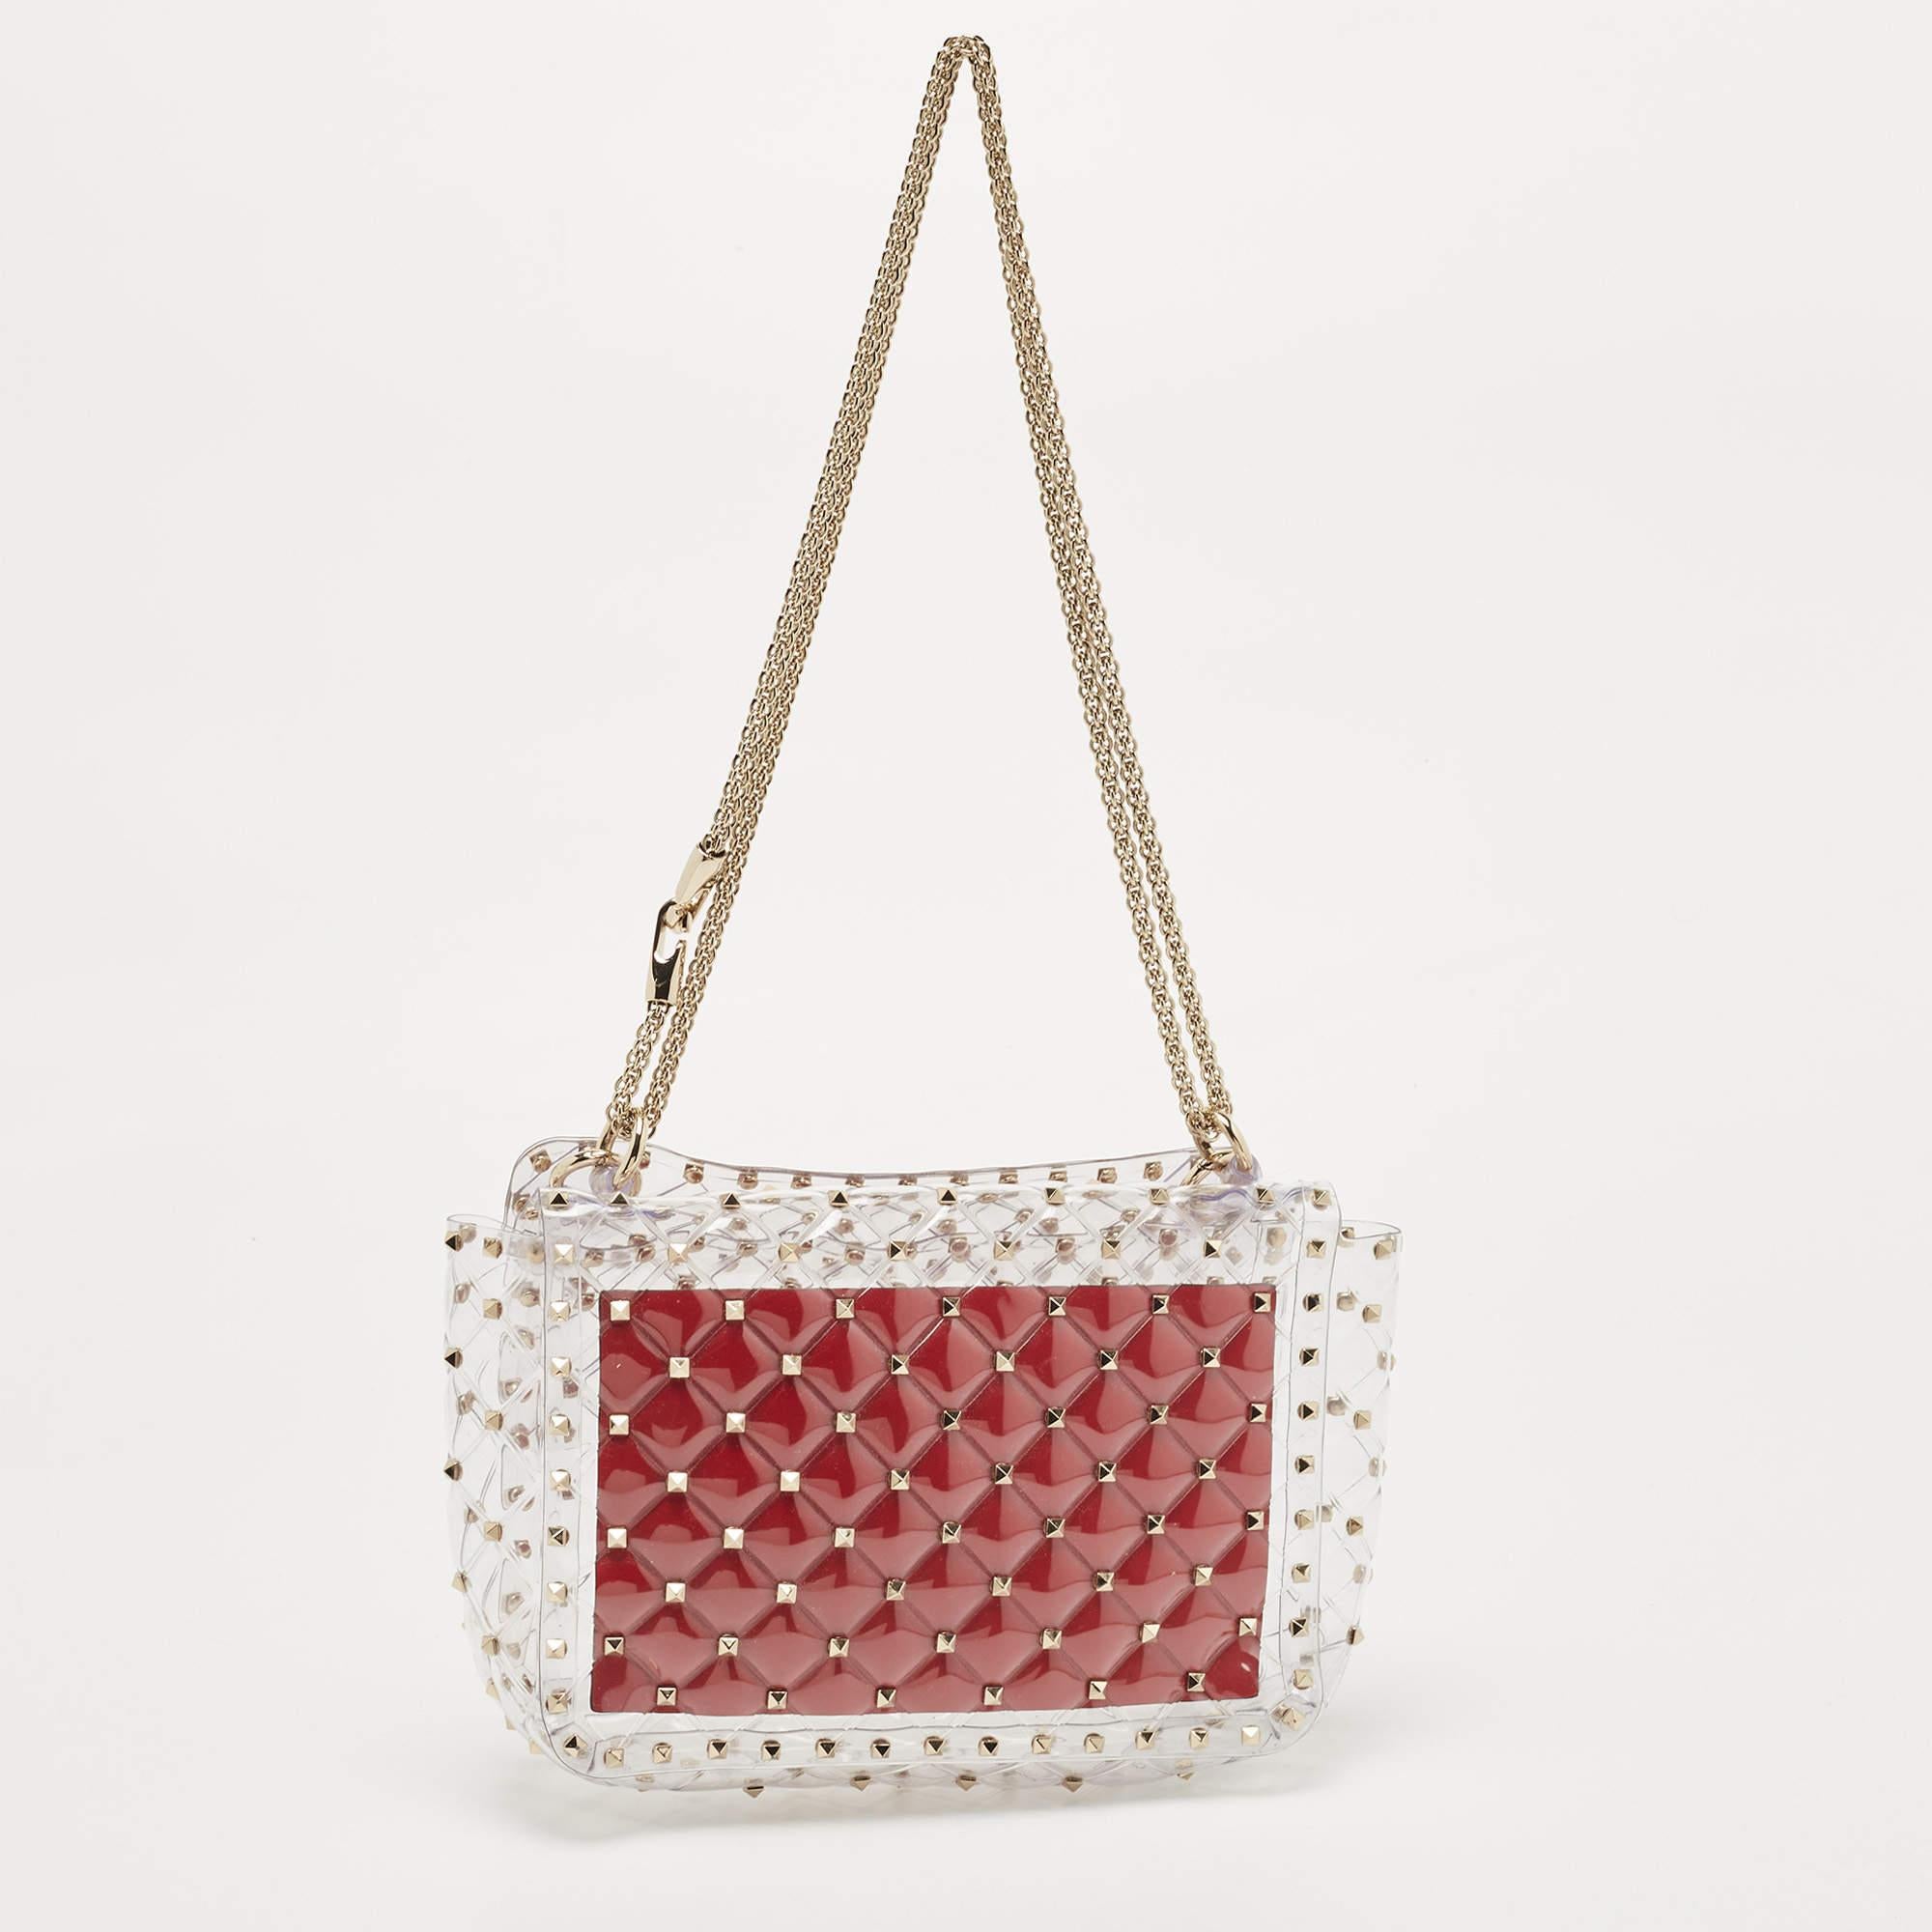 With a contemporary essence, exquisite details and faultless craftsmanship come together to form this Valentino bag. The expertly placed Rockstud Spike on the PVC marks the heritage of the brand, and it can be carried around with a chain link.